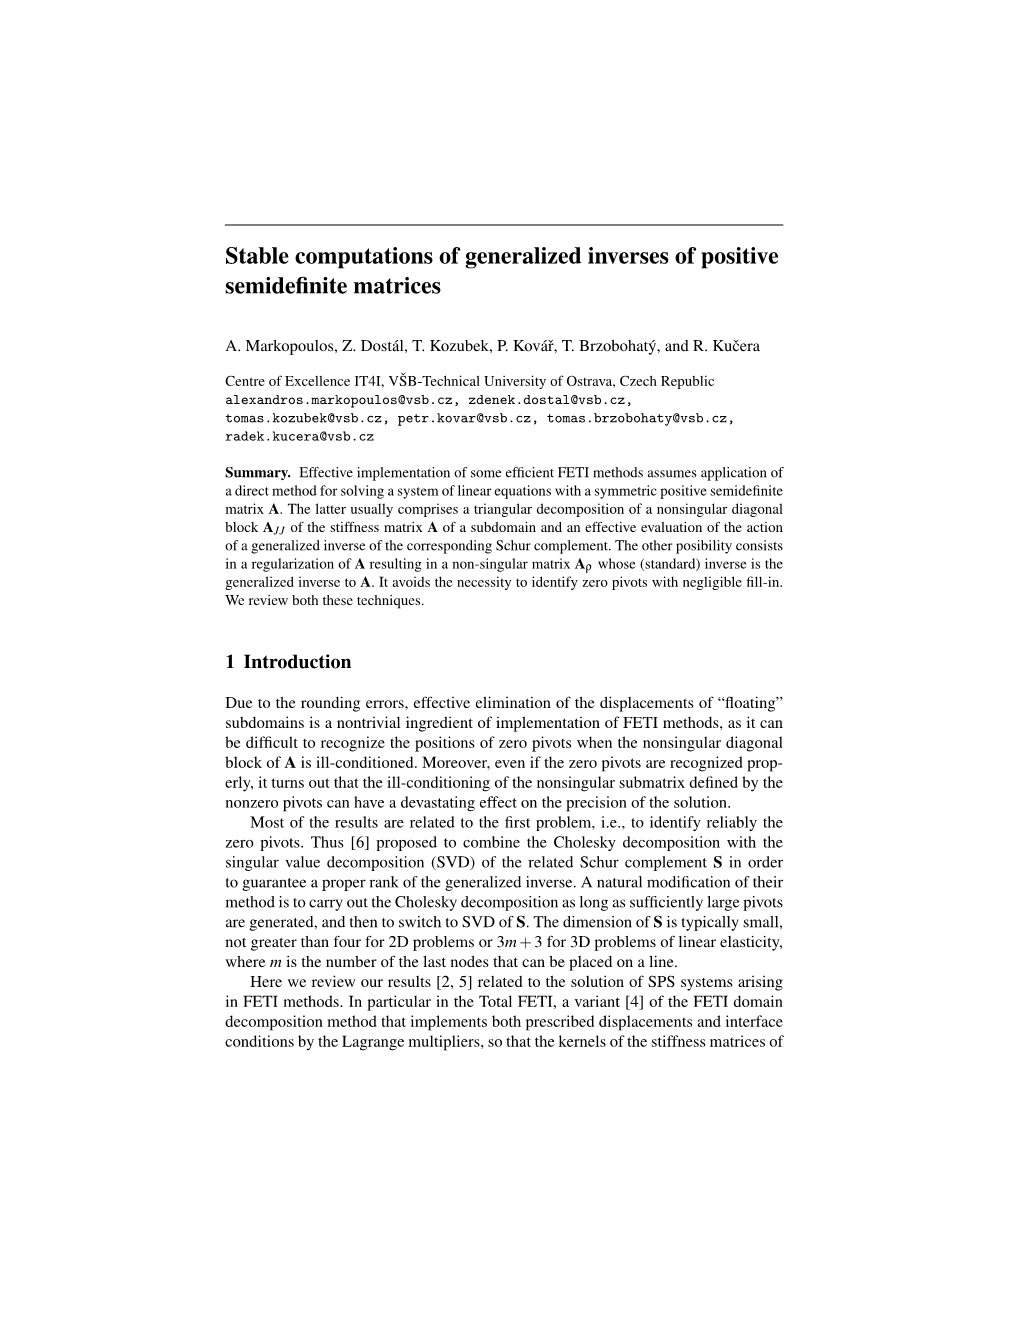 Stable Computations of Generalized Inverses of Positive Semidefinite